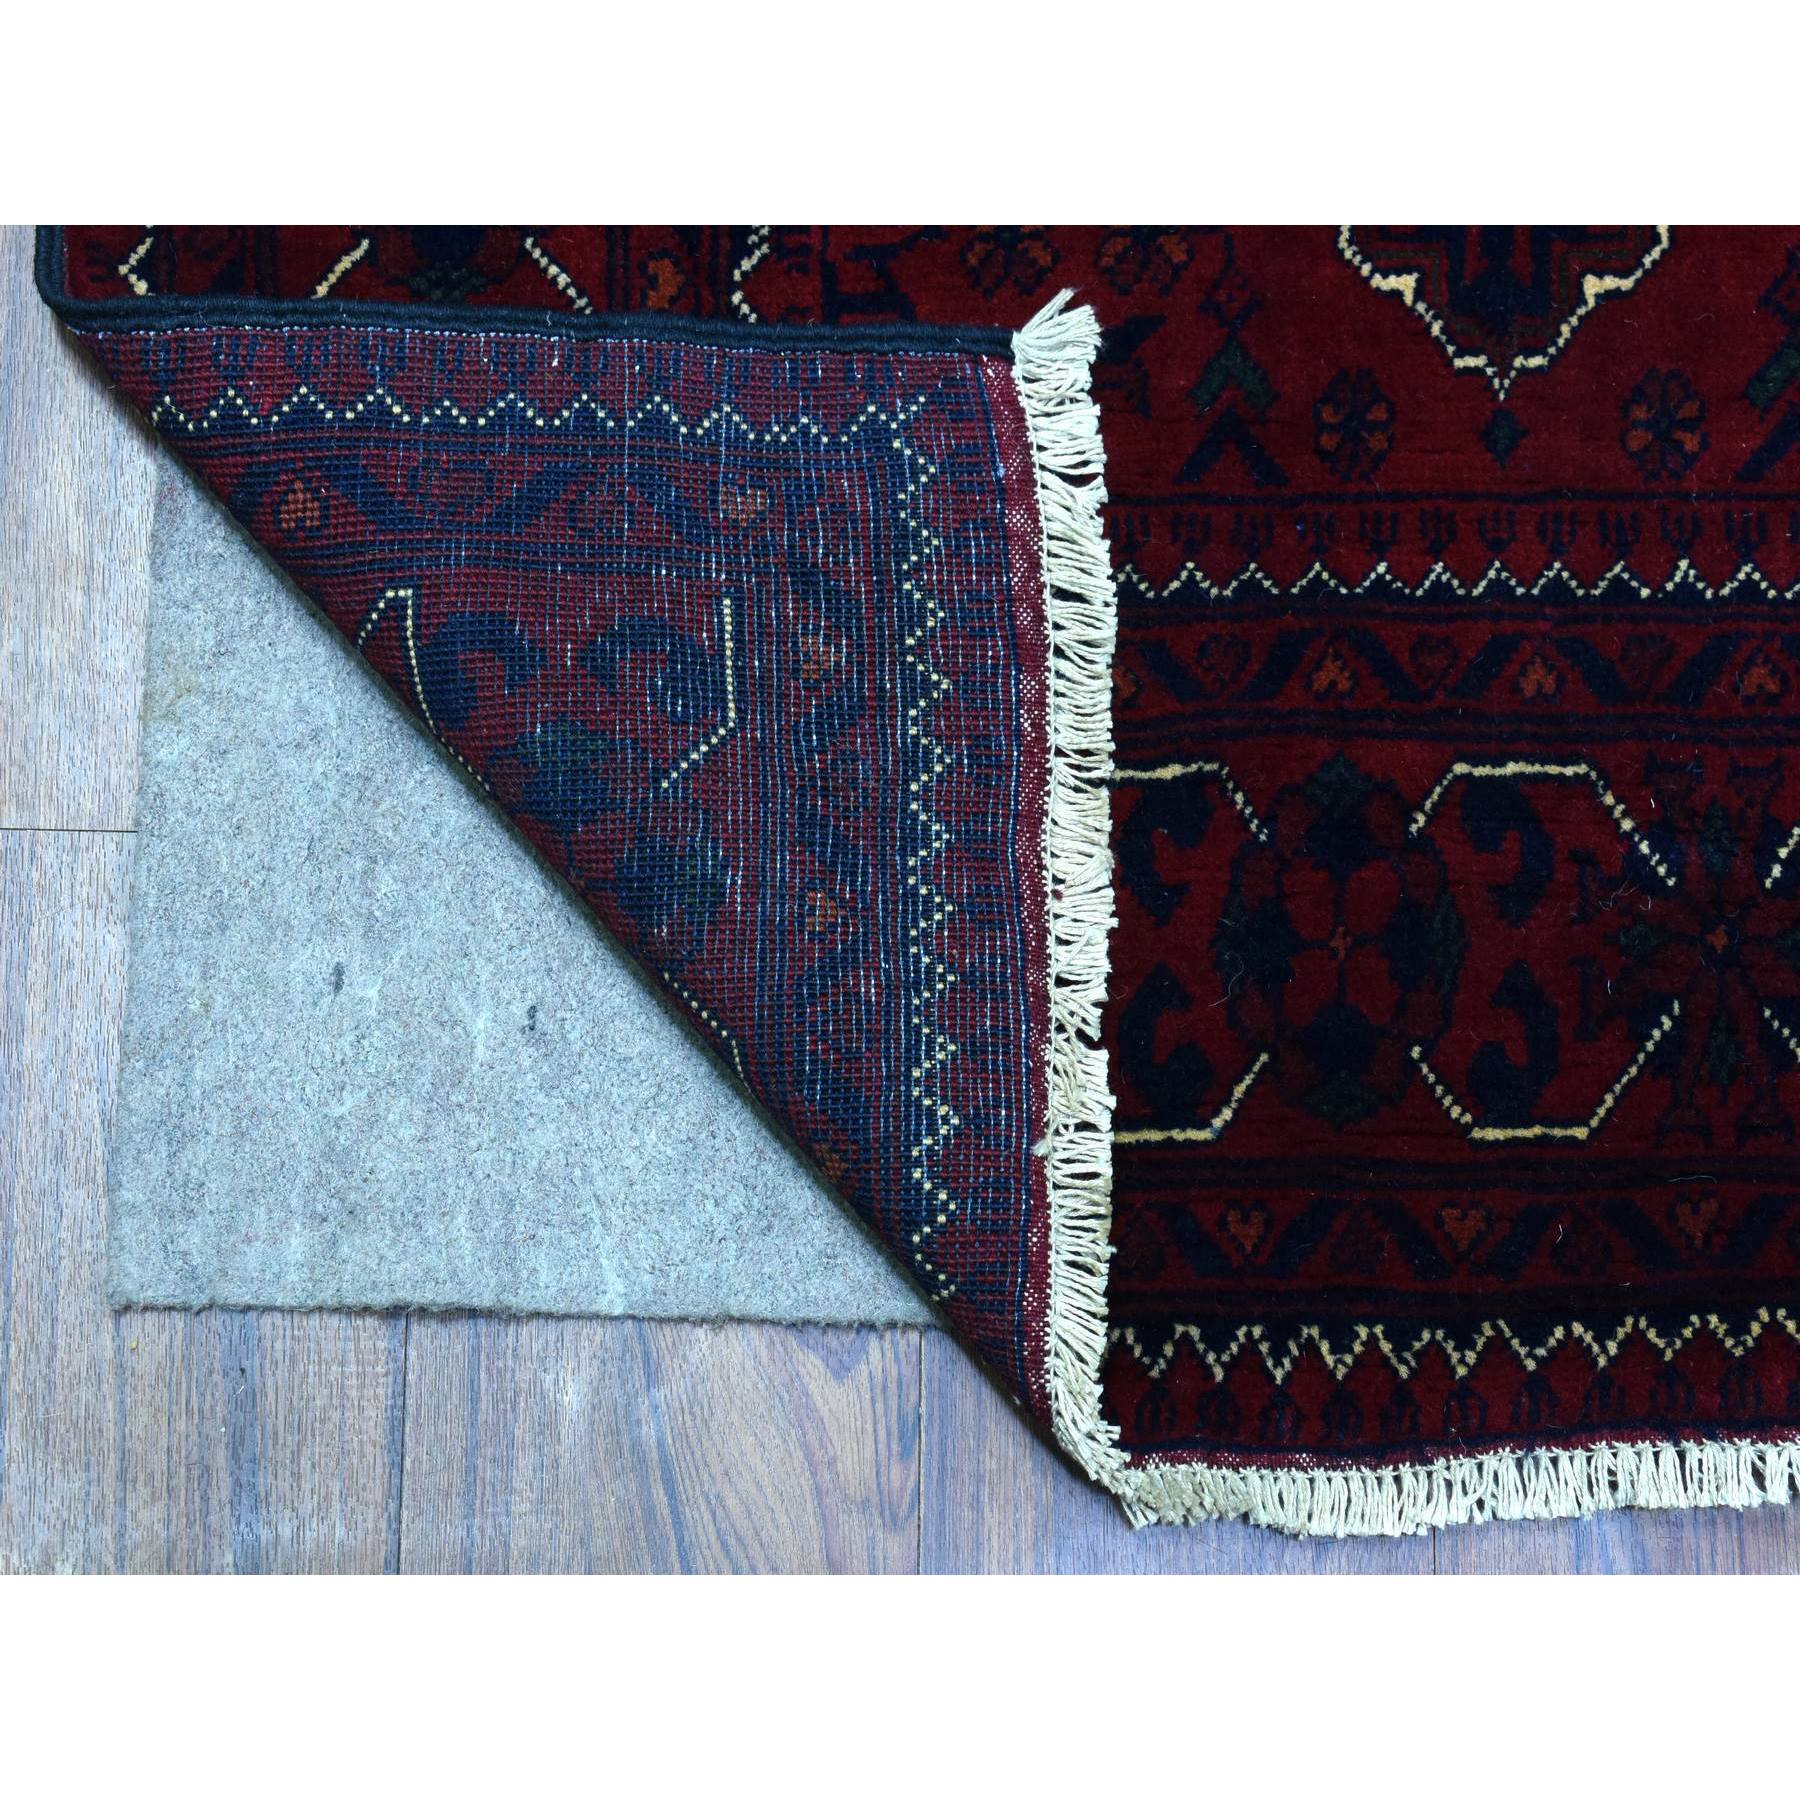 3'x9'1" Deep and Saturated Red Hand Woven, Afghan Khamyab, Geometric Medallions Runner Oriental Rug 